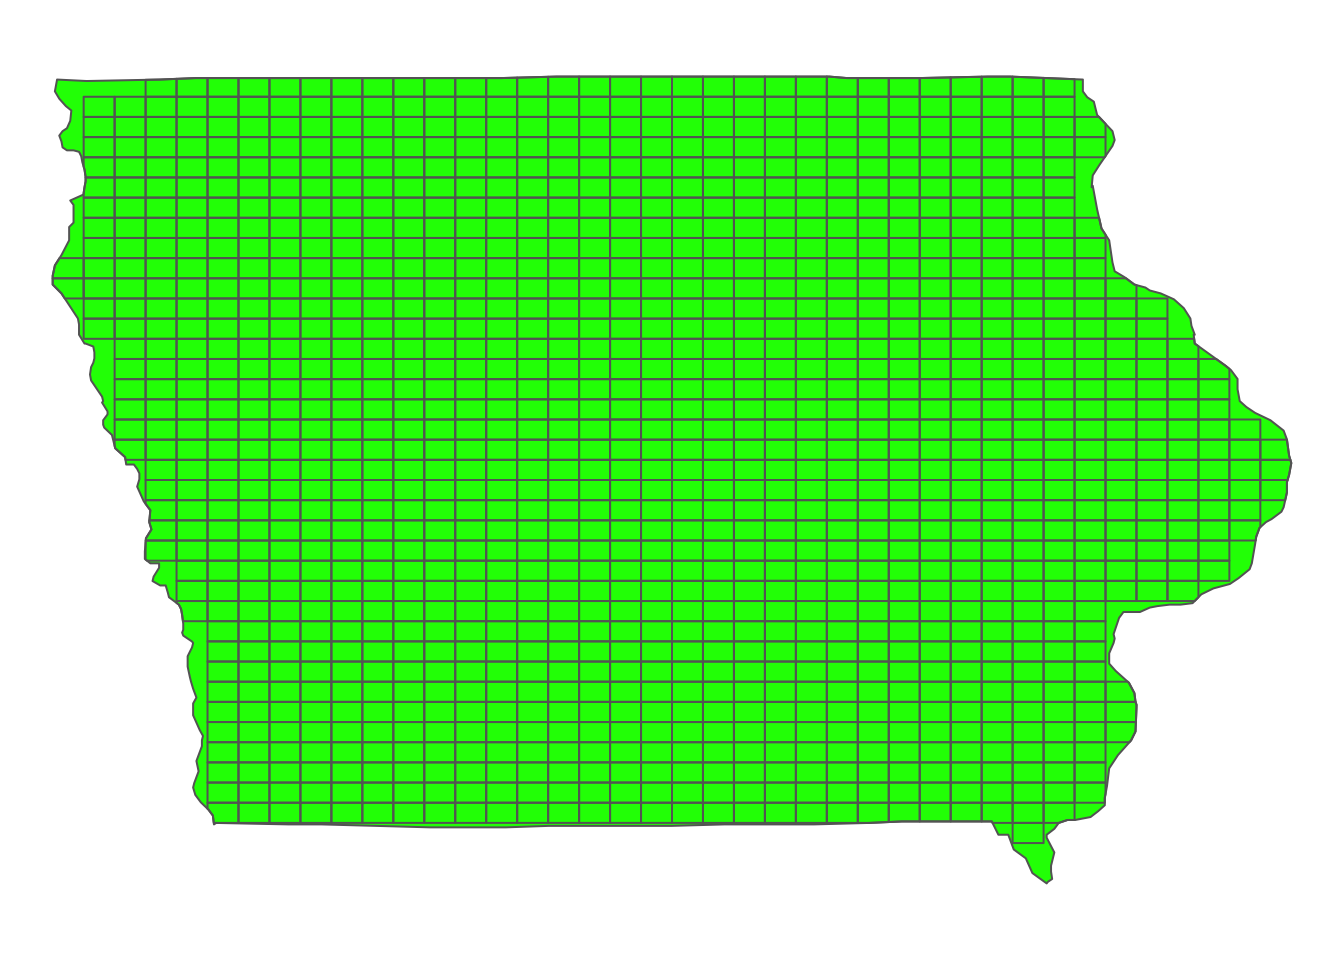 Map of regular grids generated over IA